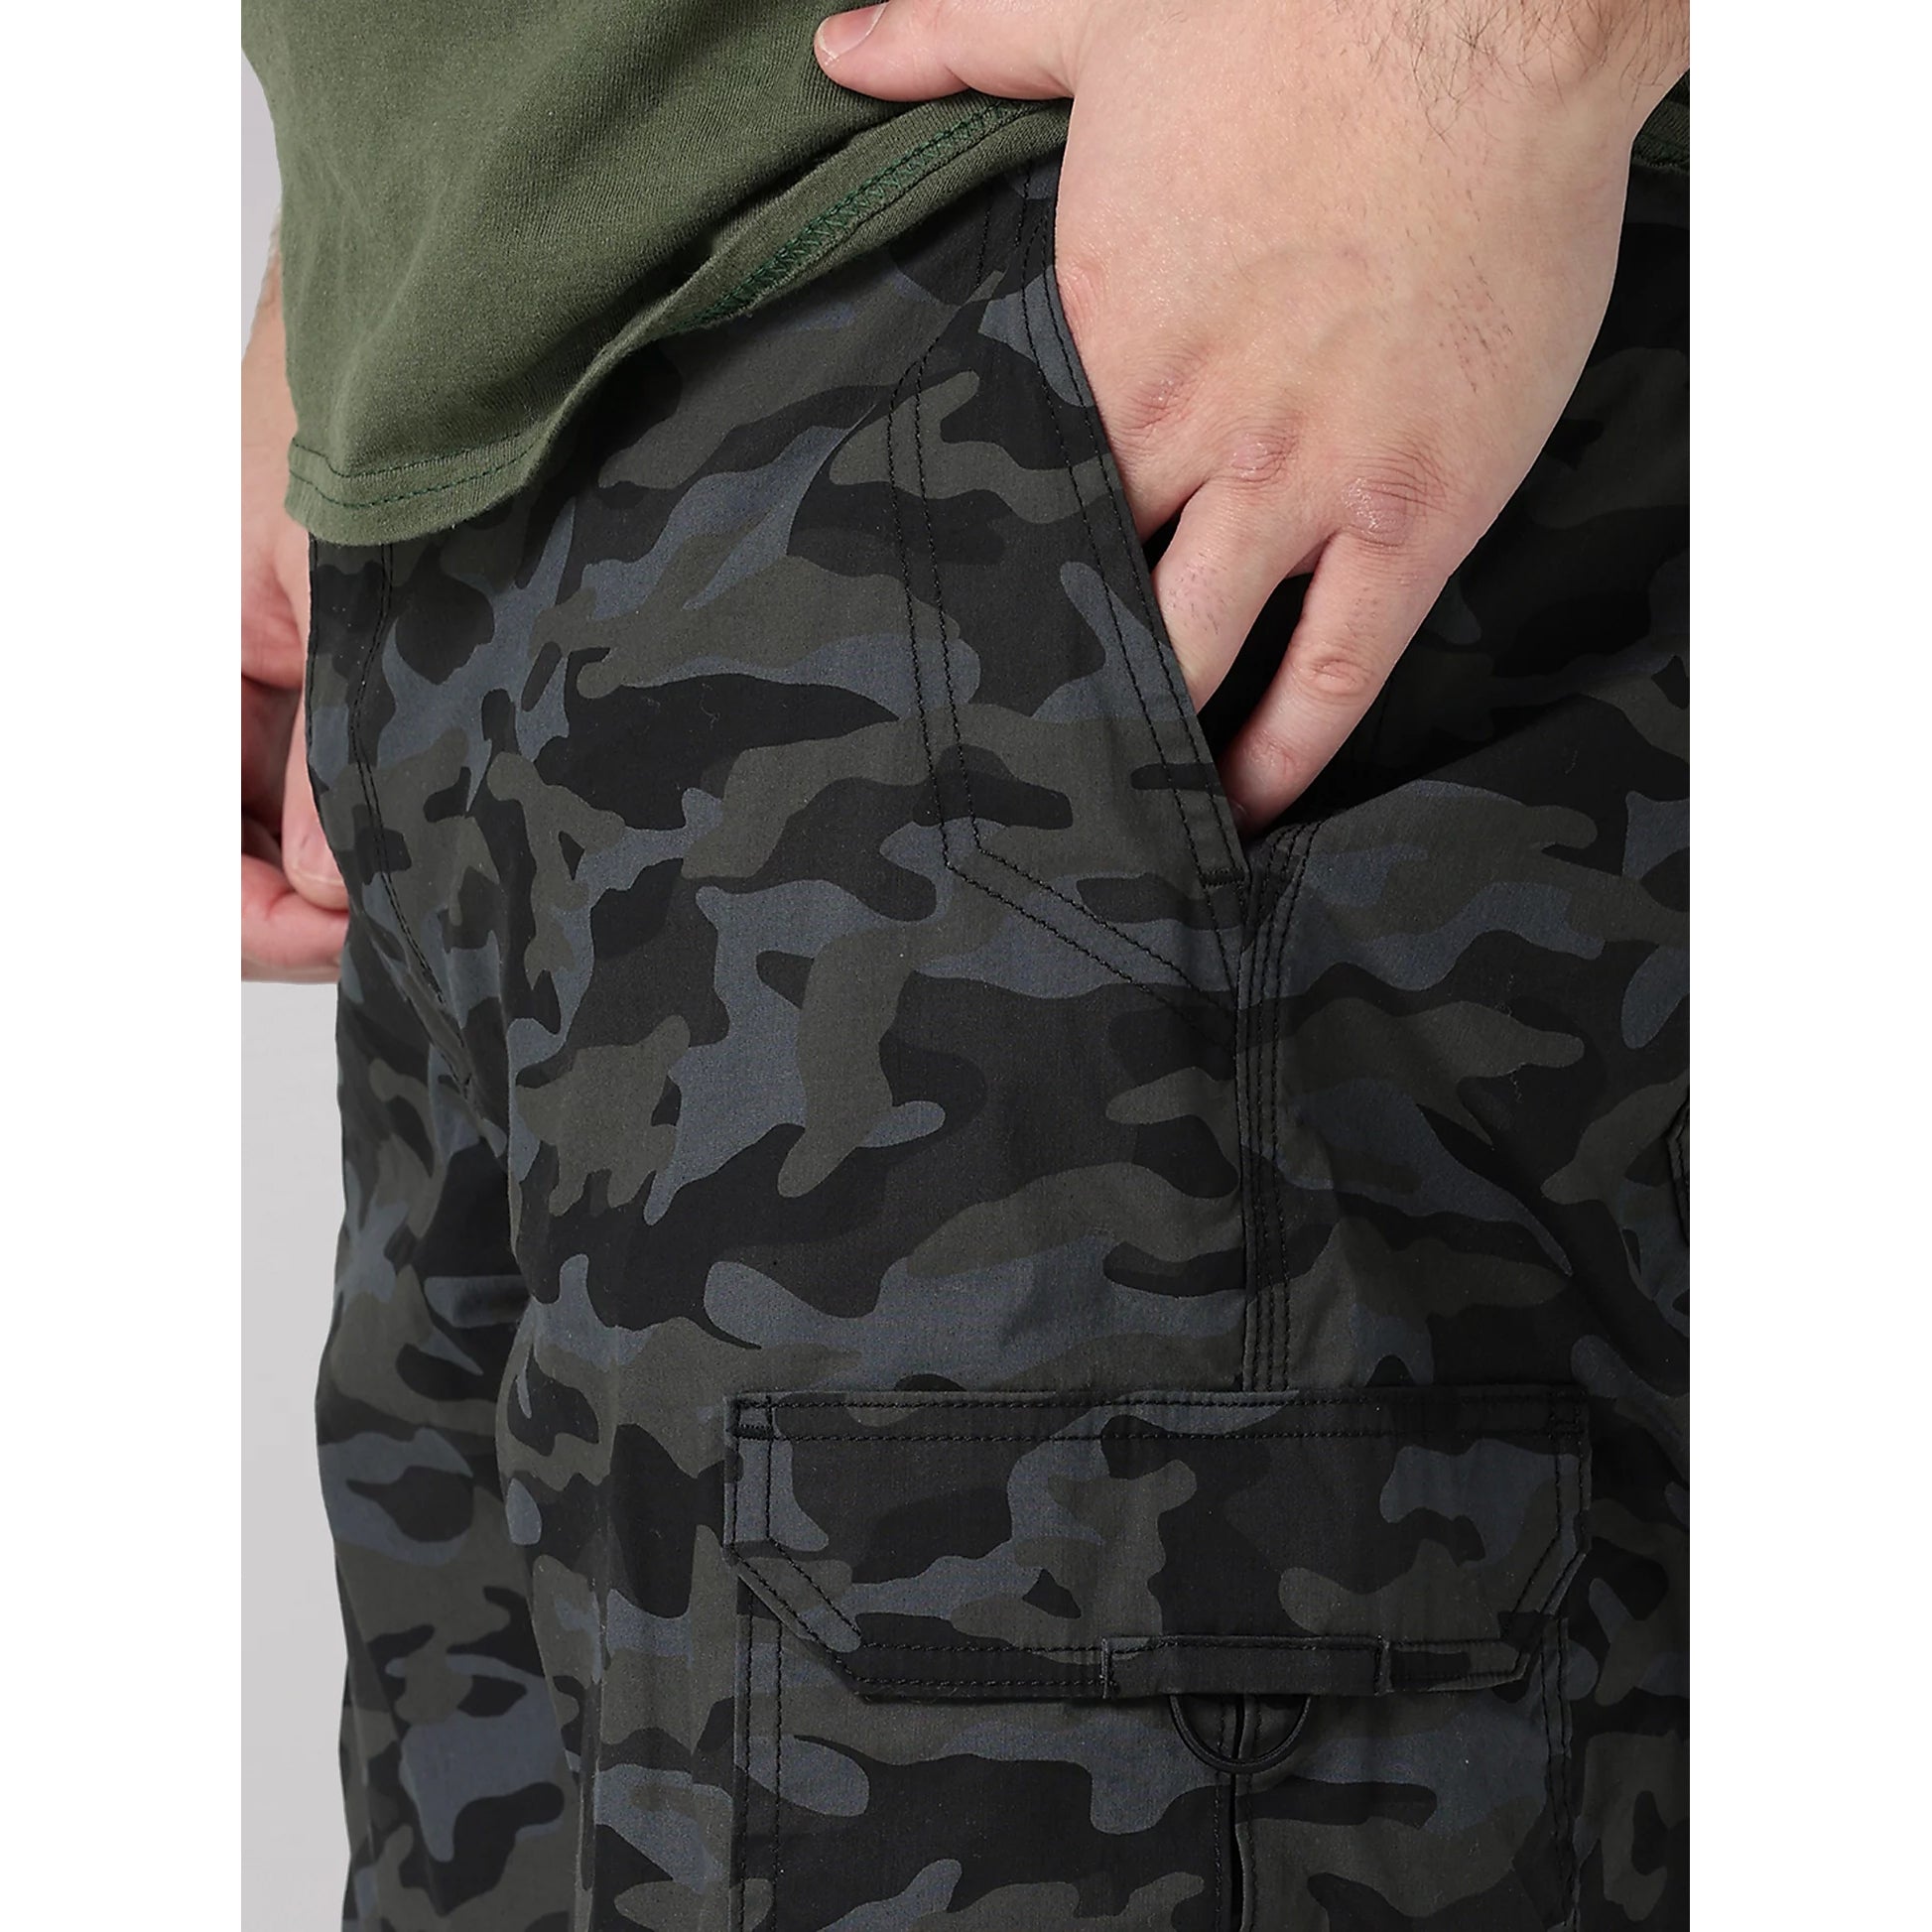 Lee 2314757 Extreme Motion Crossroad Cargo Relaxed Shorts in Black Camo Pocket Detail